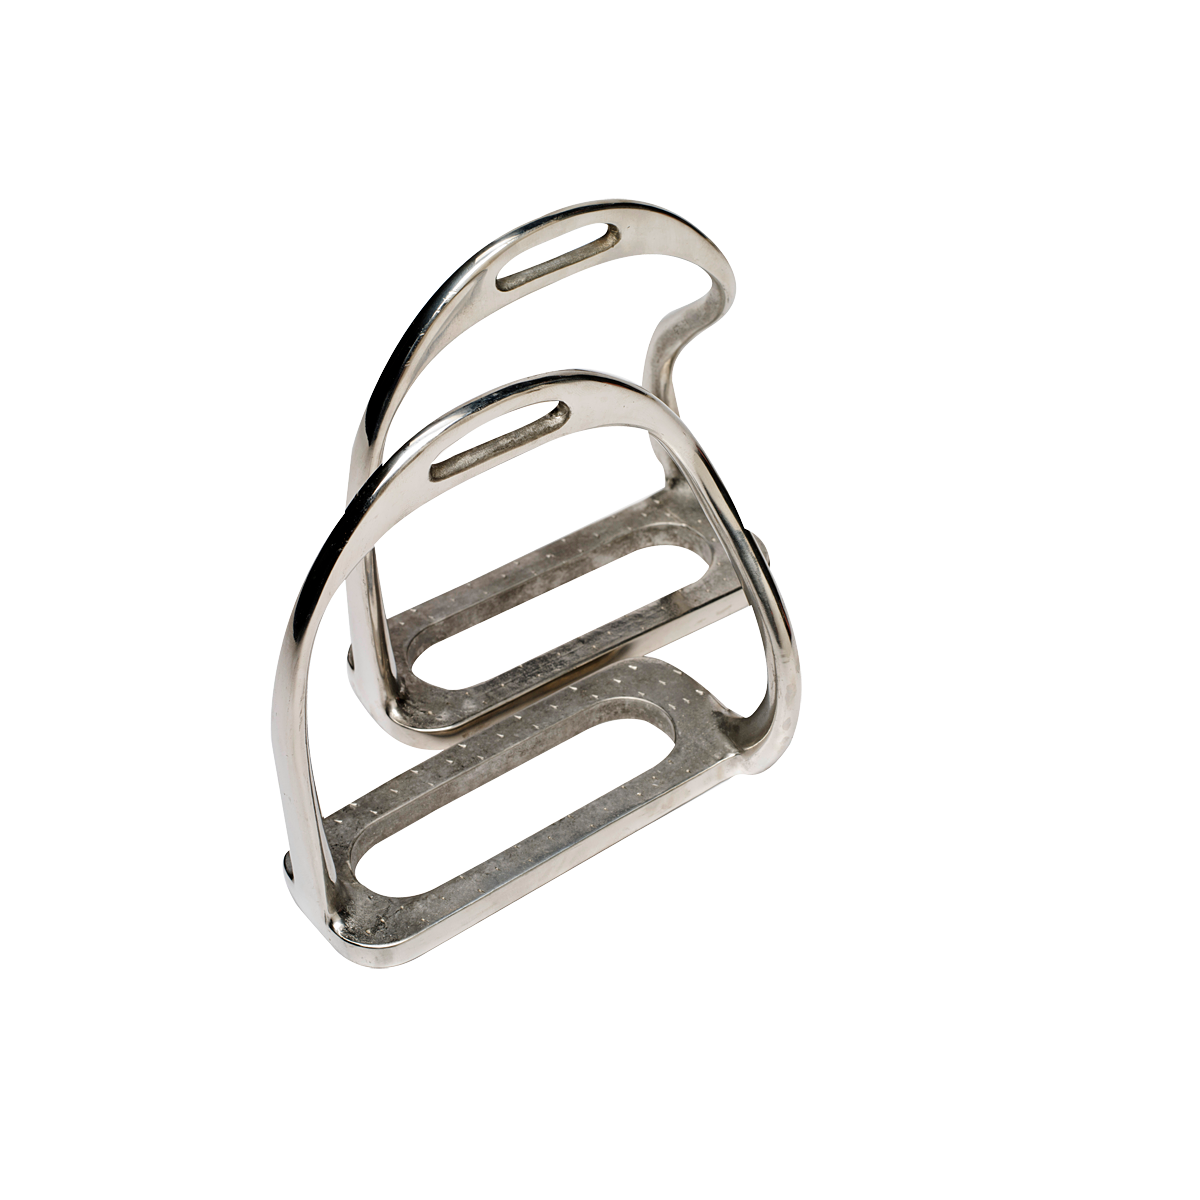 Stainless Steel Safety Stirrups for trackwork